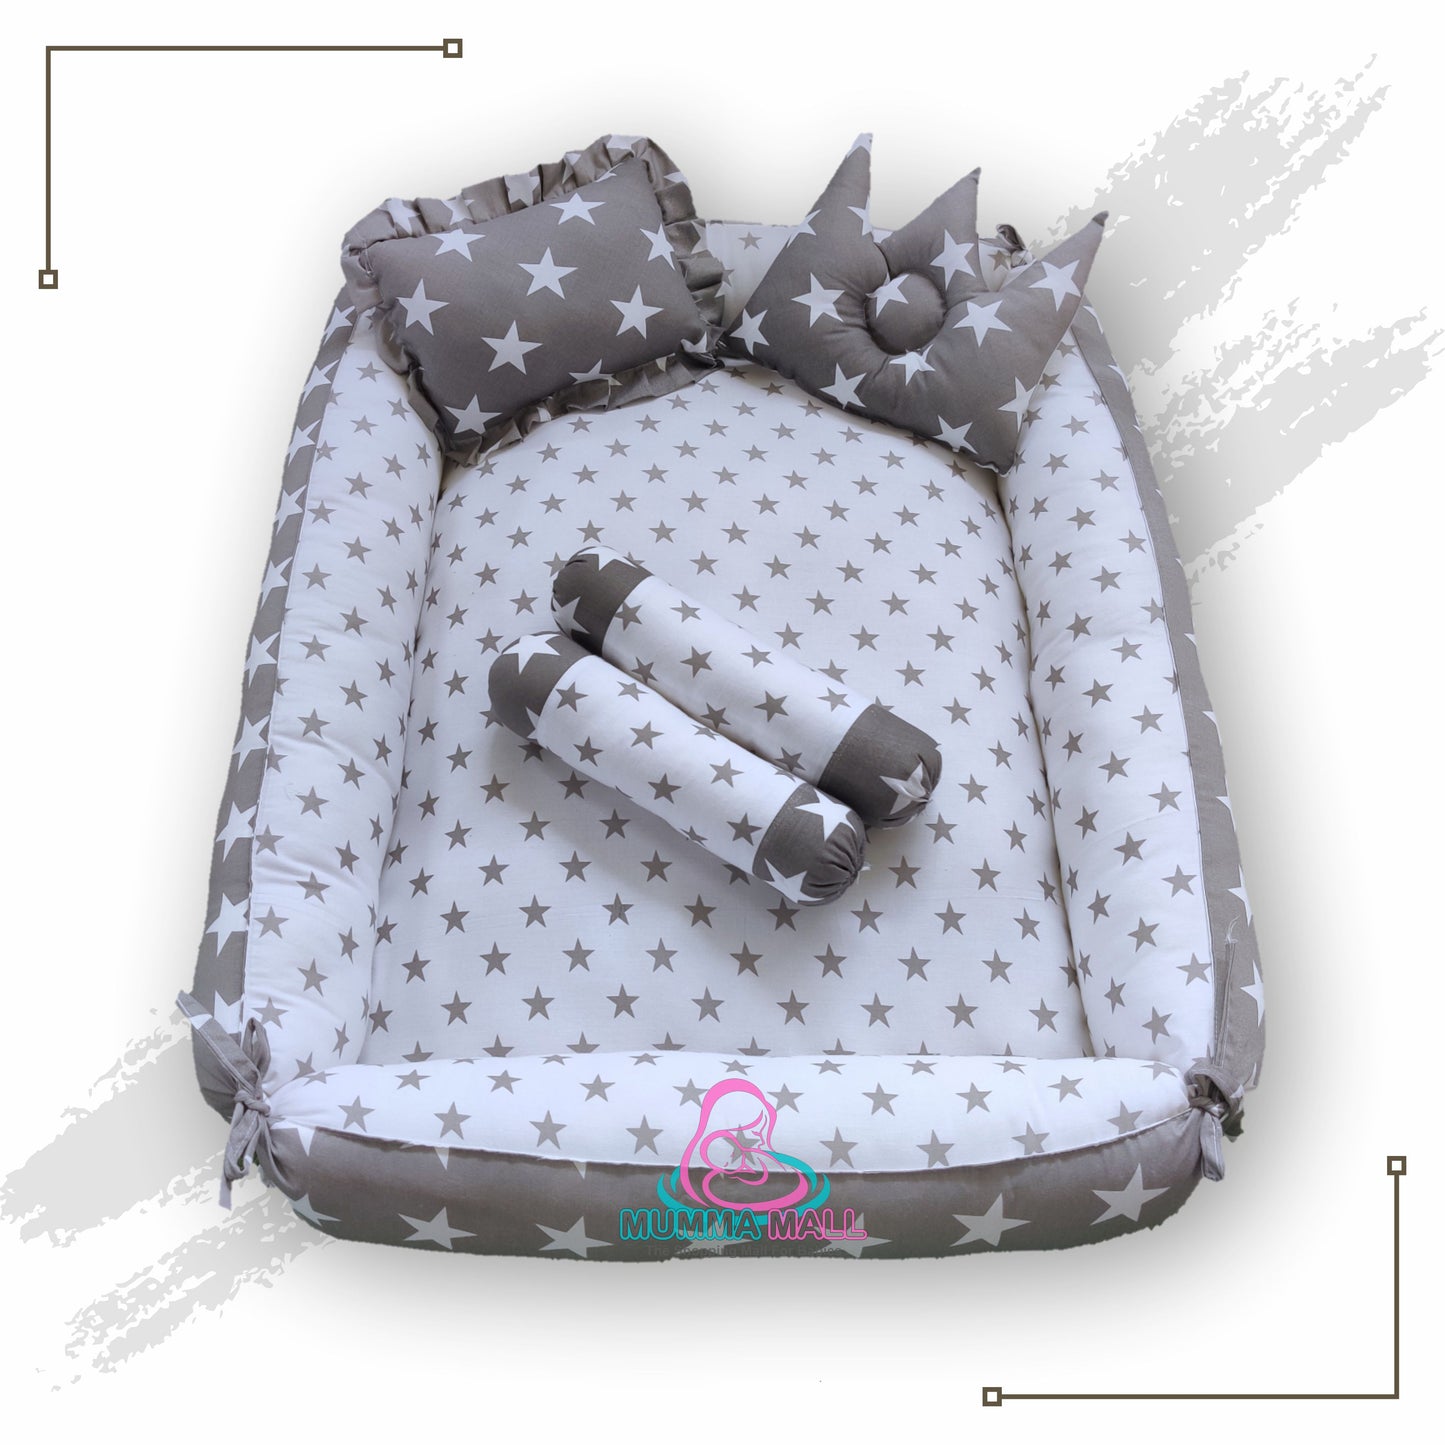 Baby box mattress set with set of 4 pillows as neck support, side support and toy (Grey and White)